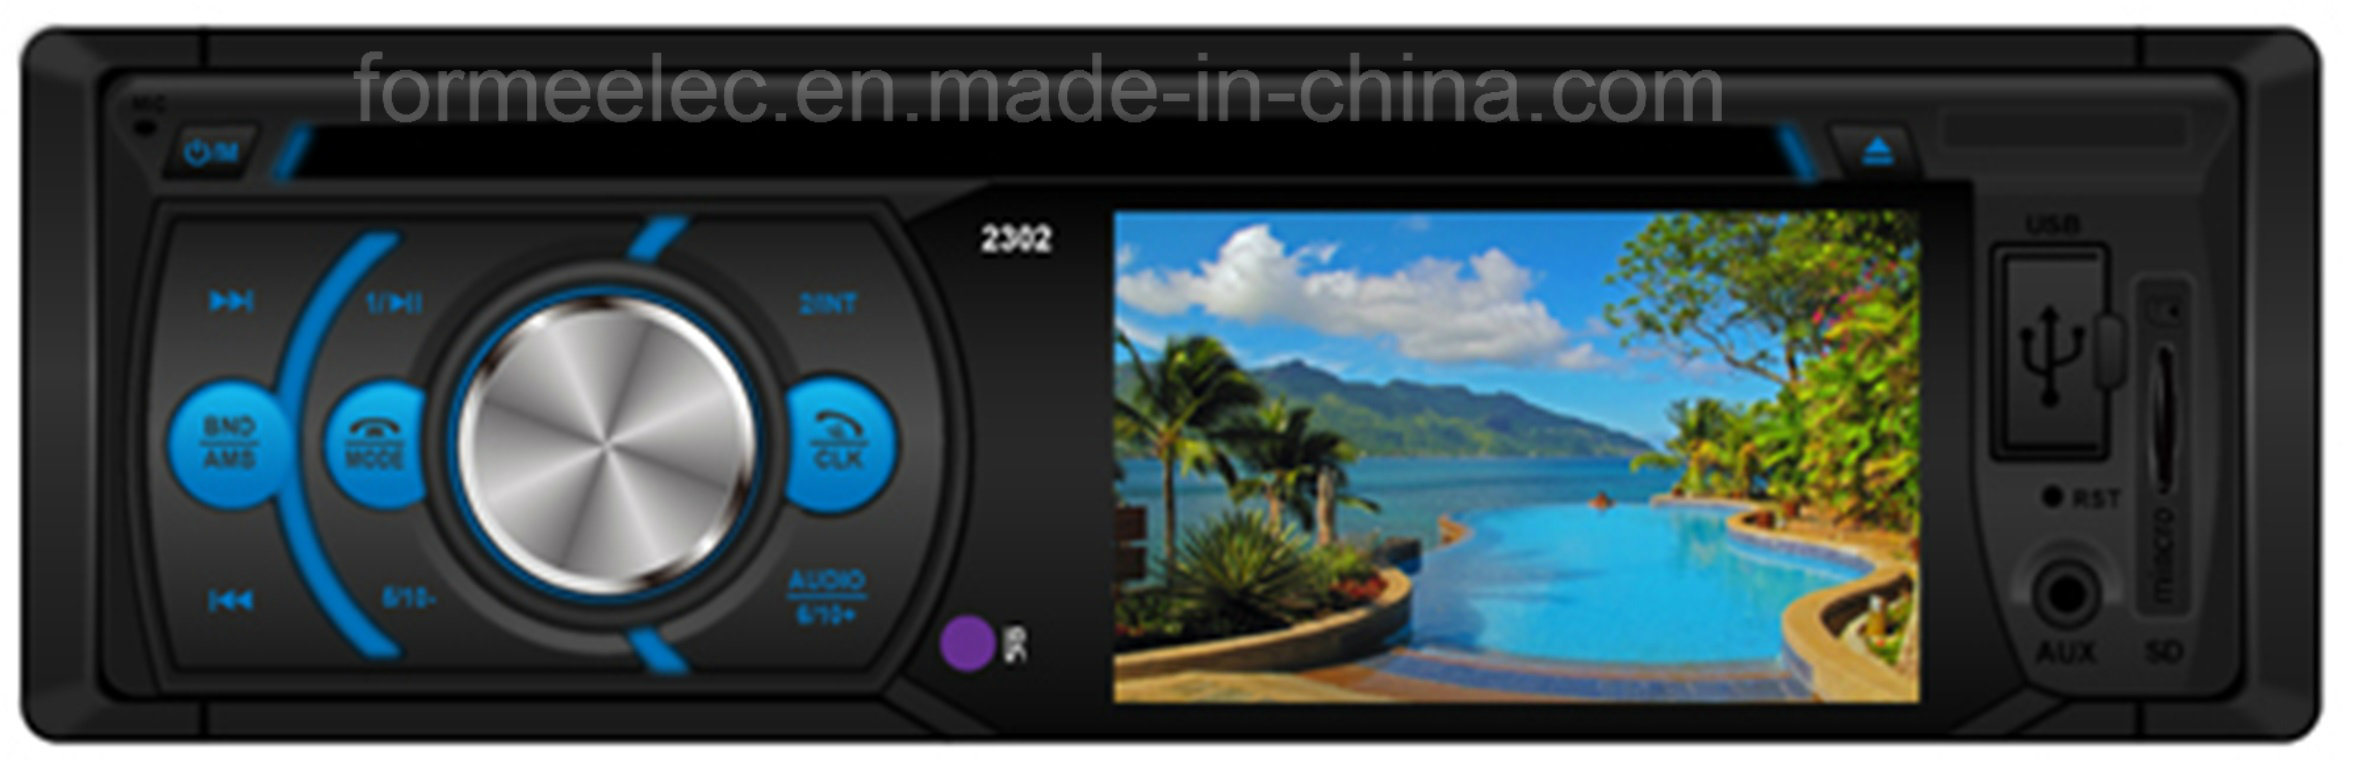 3 Inch LCD Car DVD Player with USB SD Bluetooth